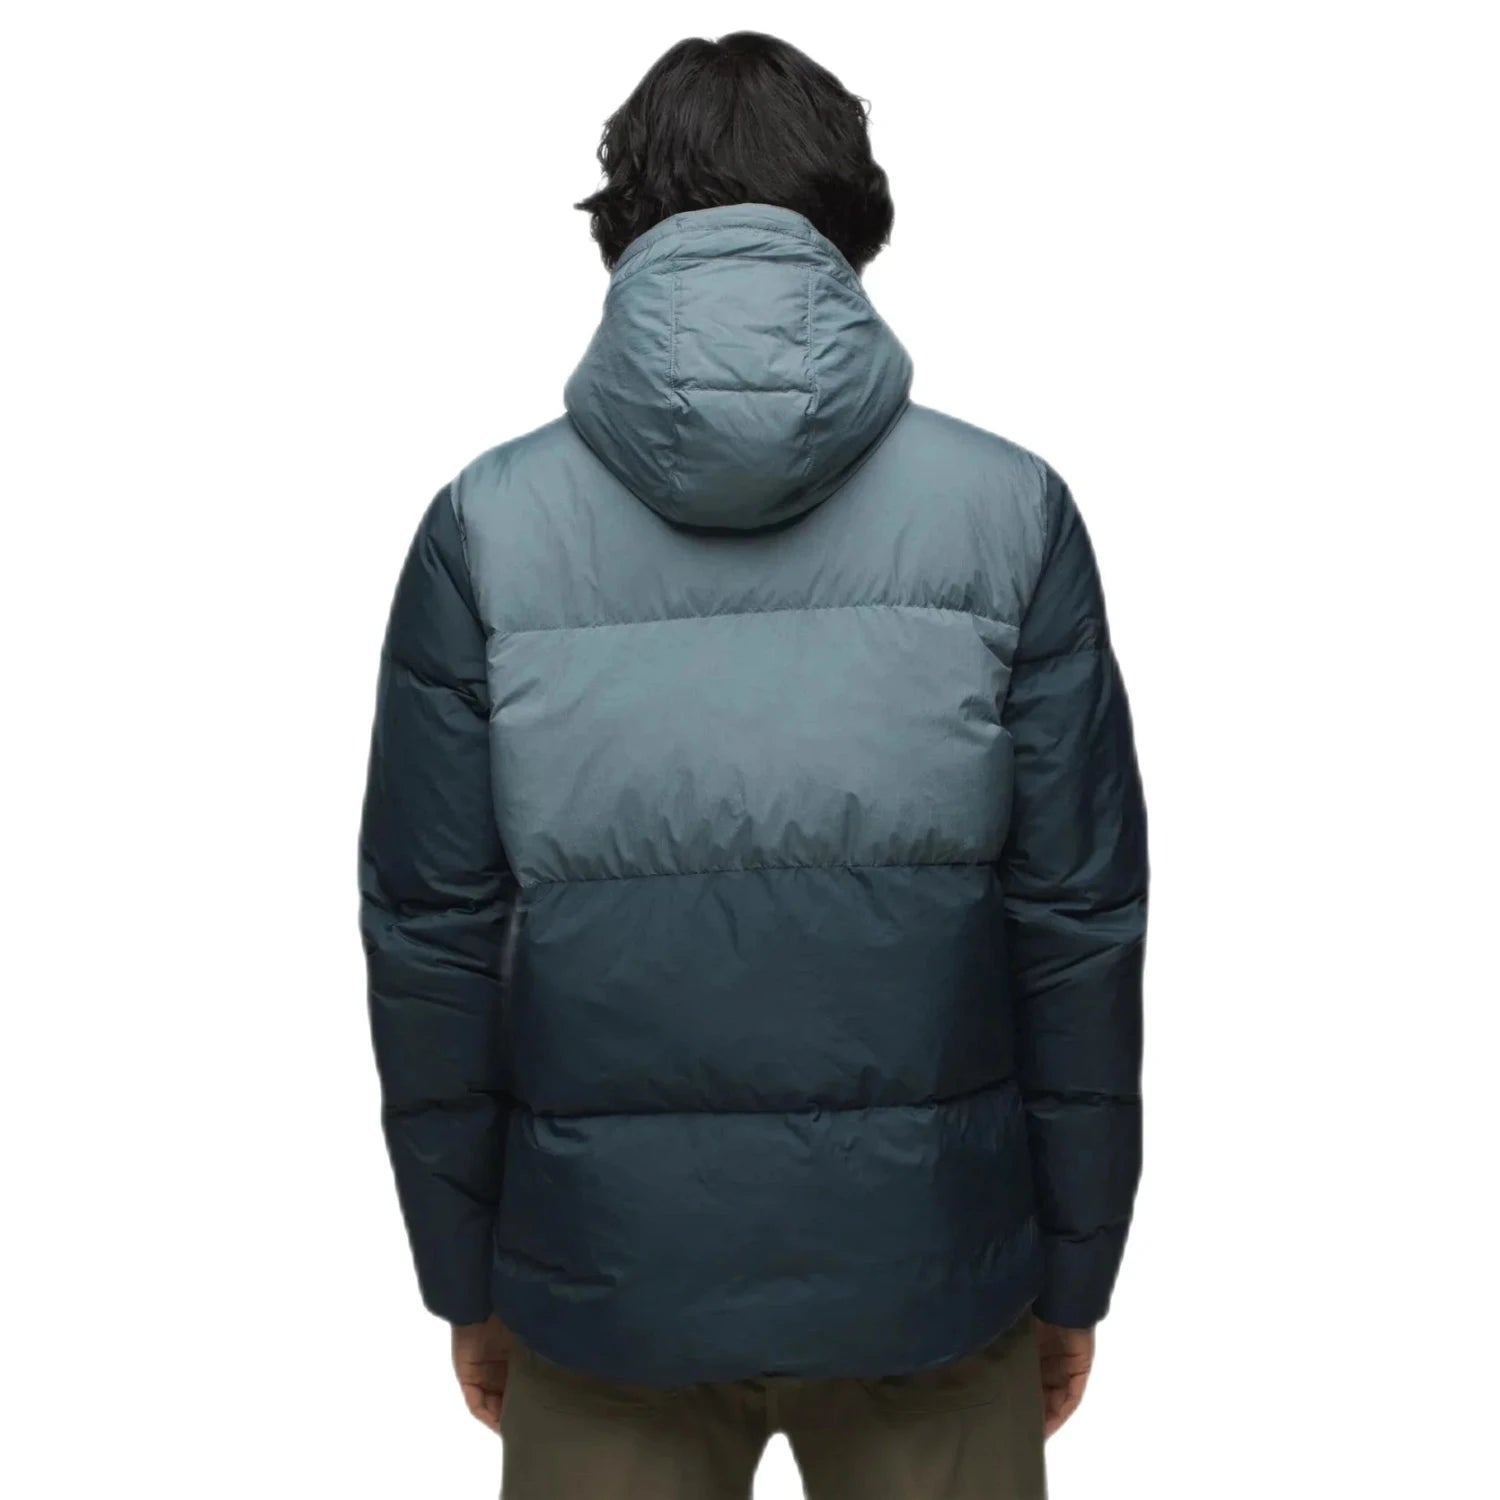 prAna Men's Timber Trail Jacket shown on model in the Weathered Blue Colorblock. Back view.